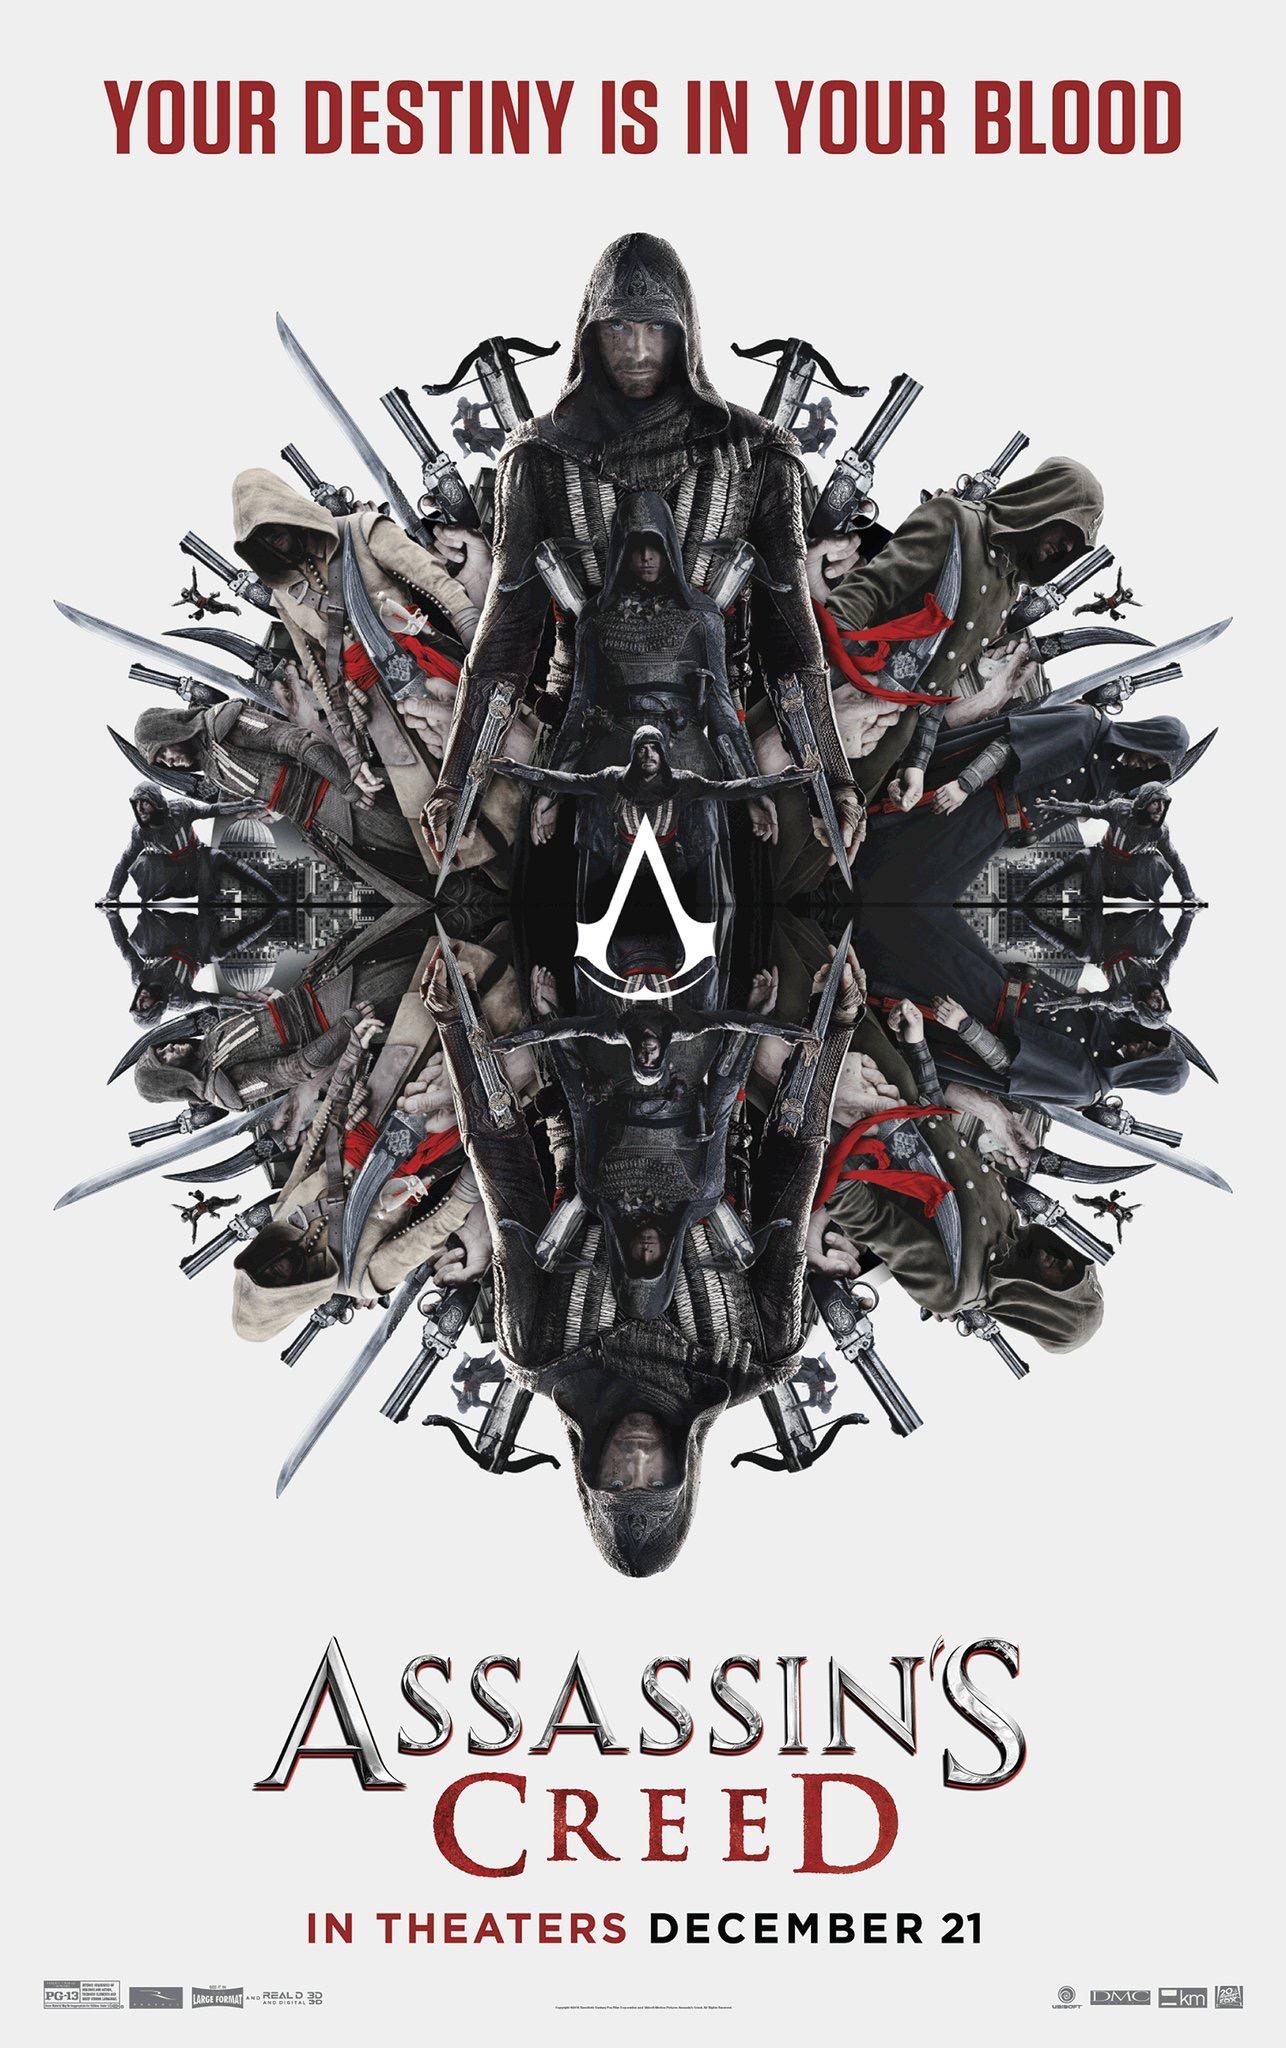 assassins creed destiny Assassin's Creed "Destiny In Your Blood" Poster